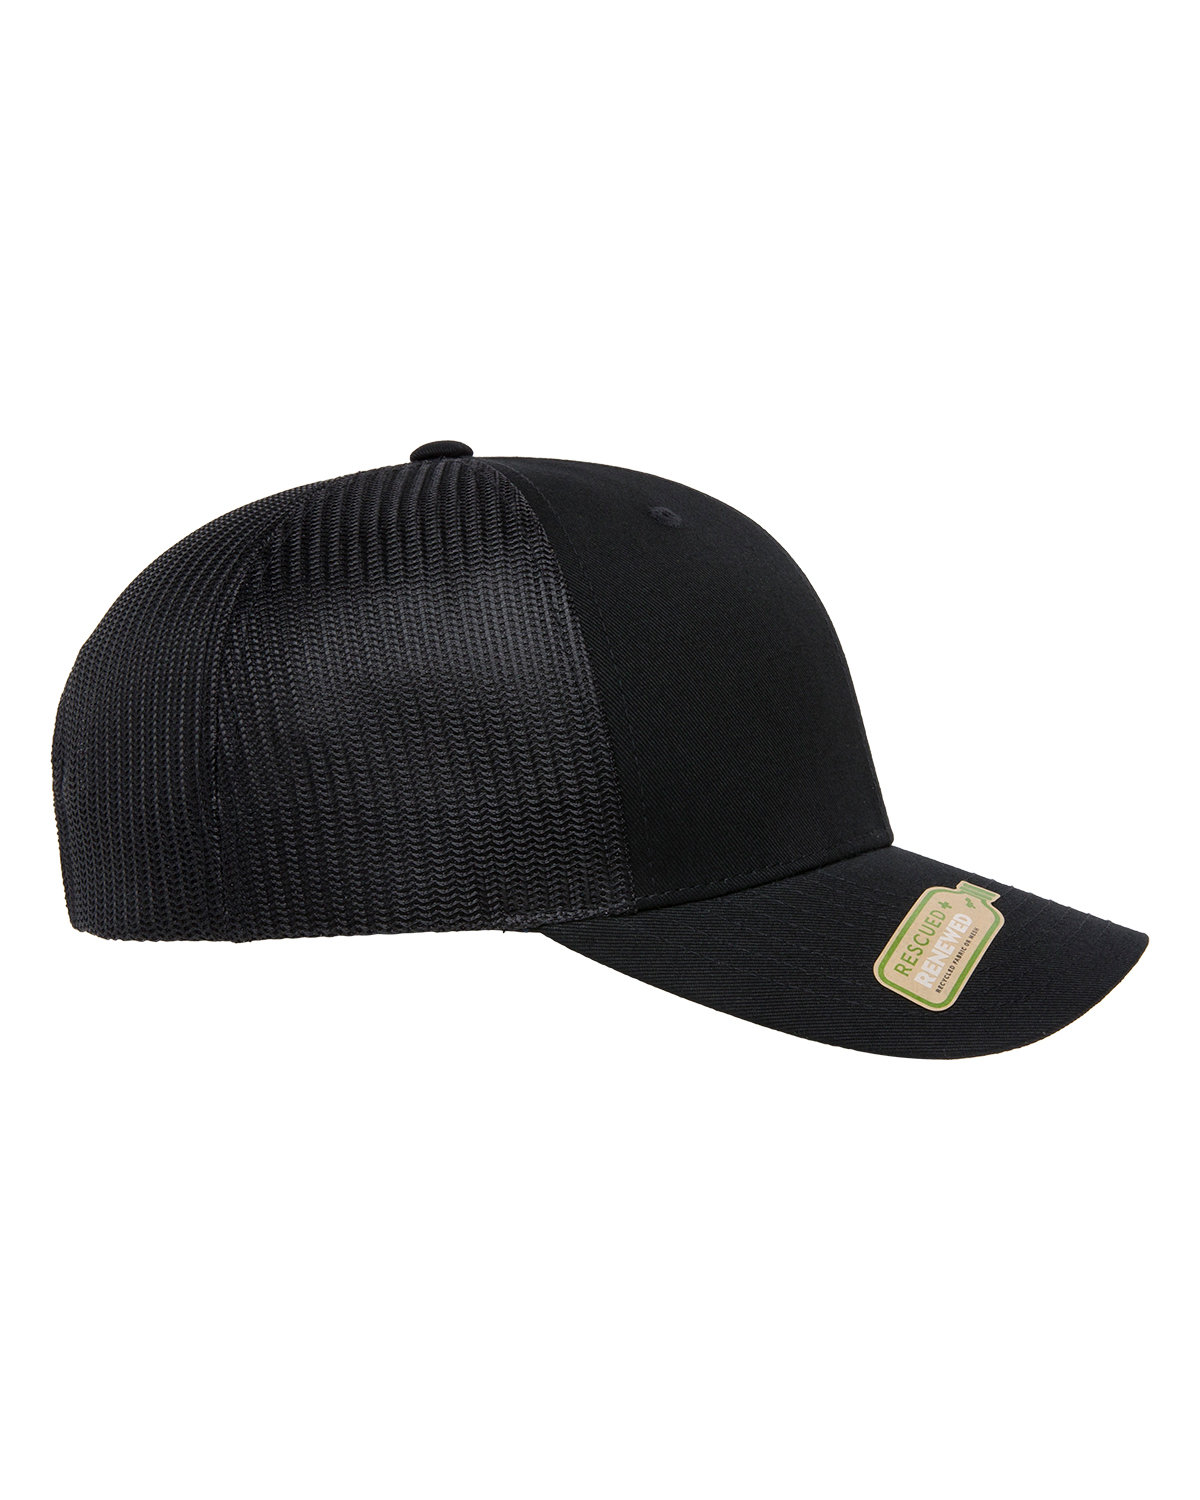 Yupoong Classics® Recycled Mesh Retro Trucker Cap | alphabroder